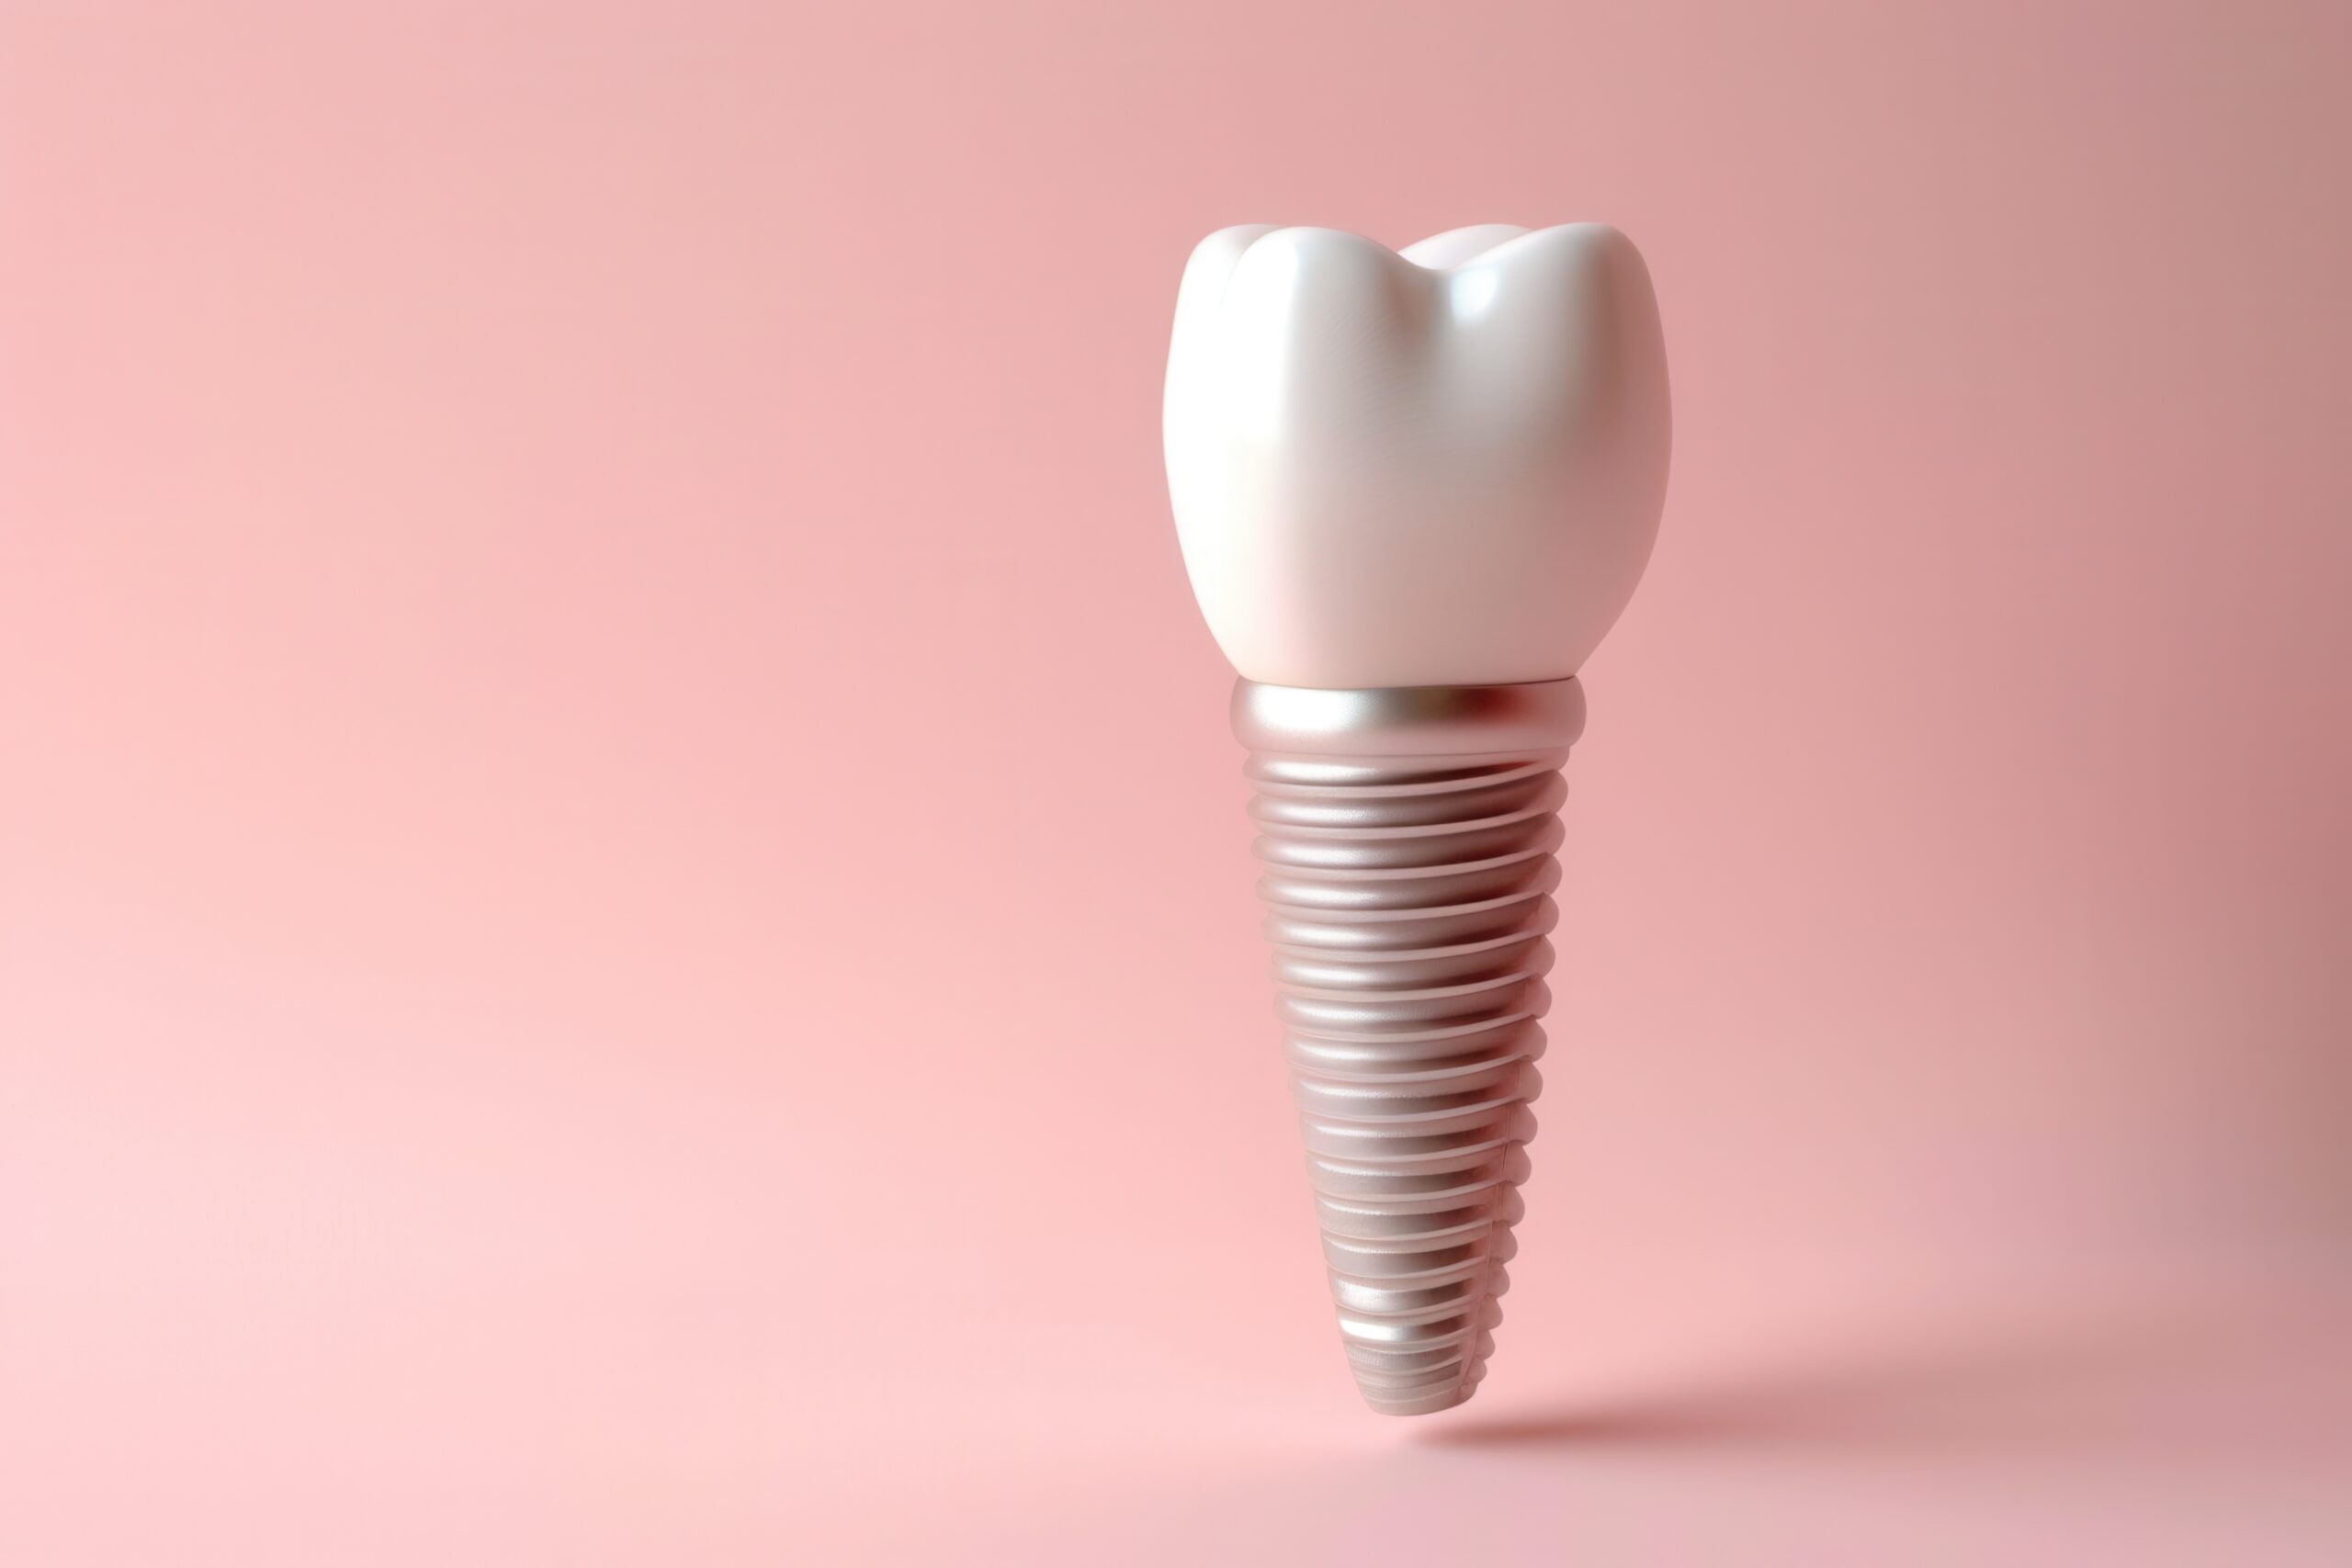 What influences the cost of tooth implants in Singapore?